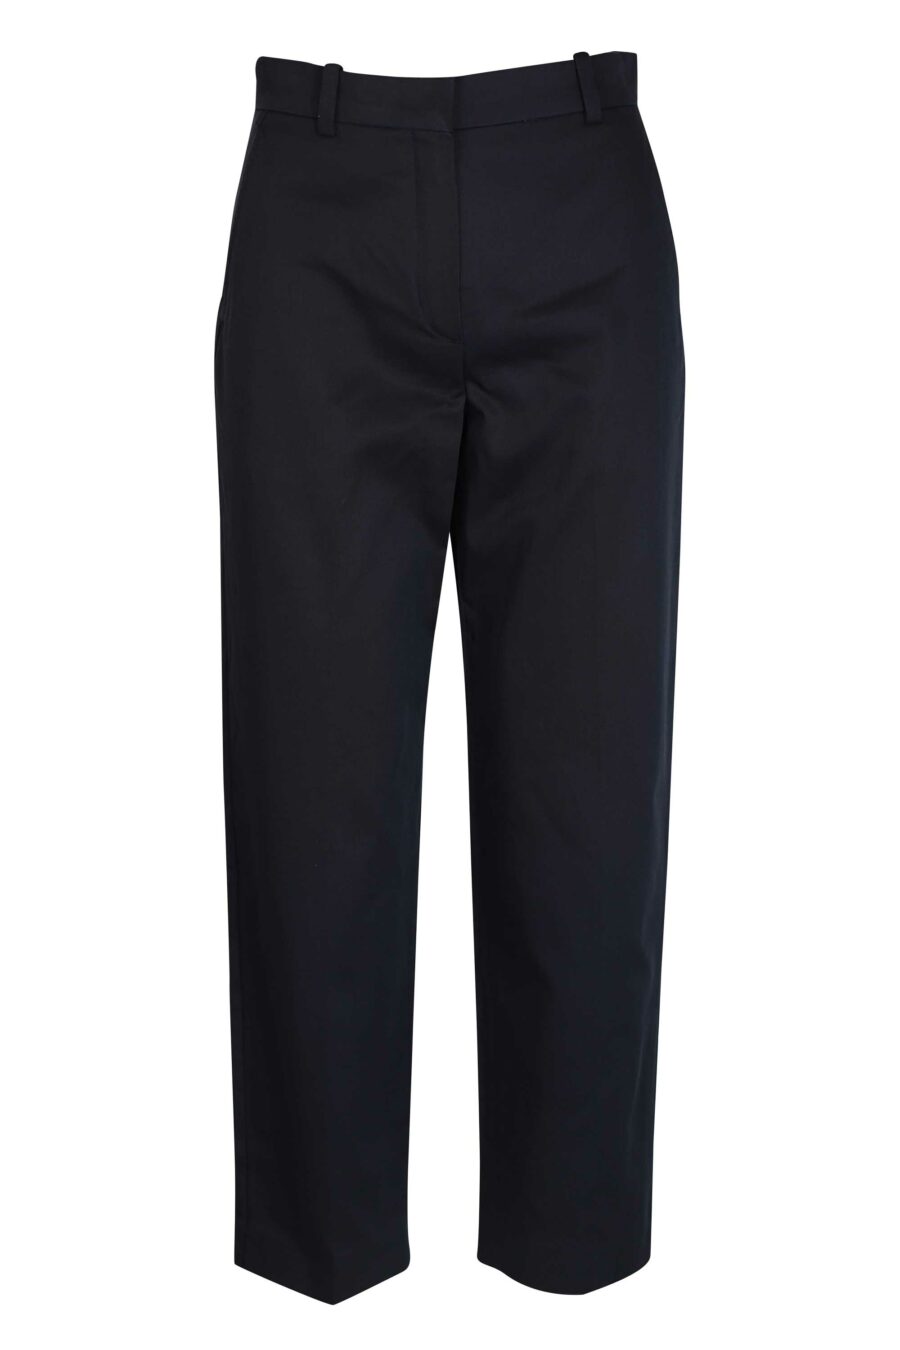 Blue trousers with logo - 3612230415409